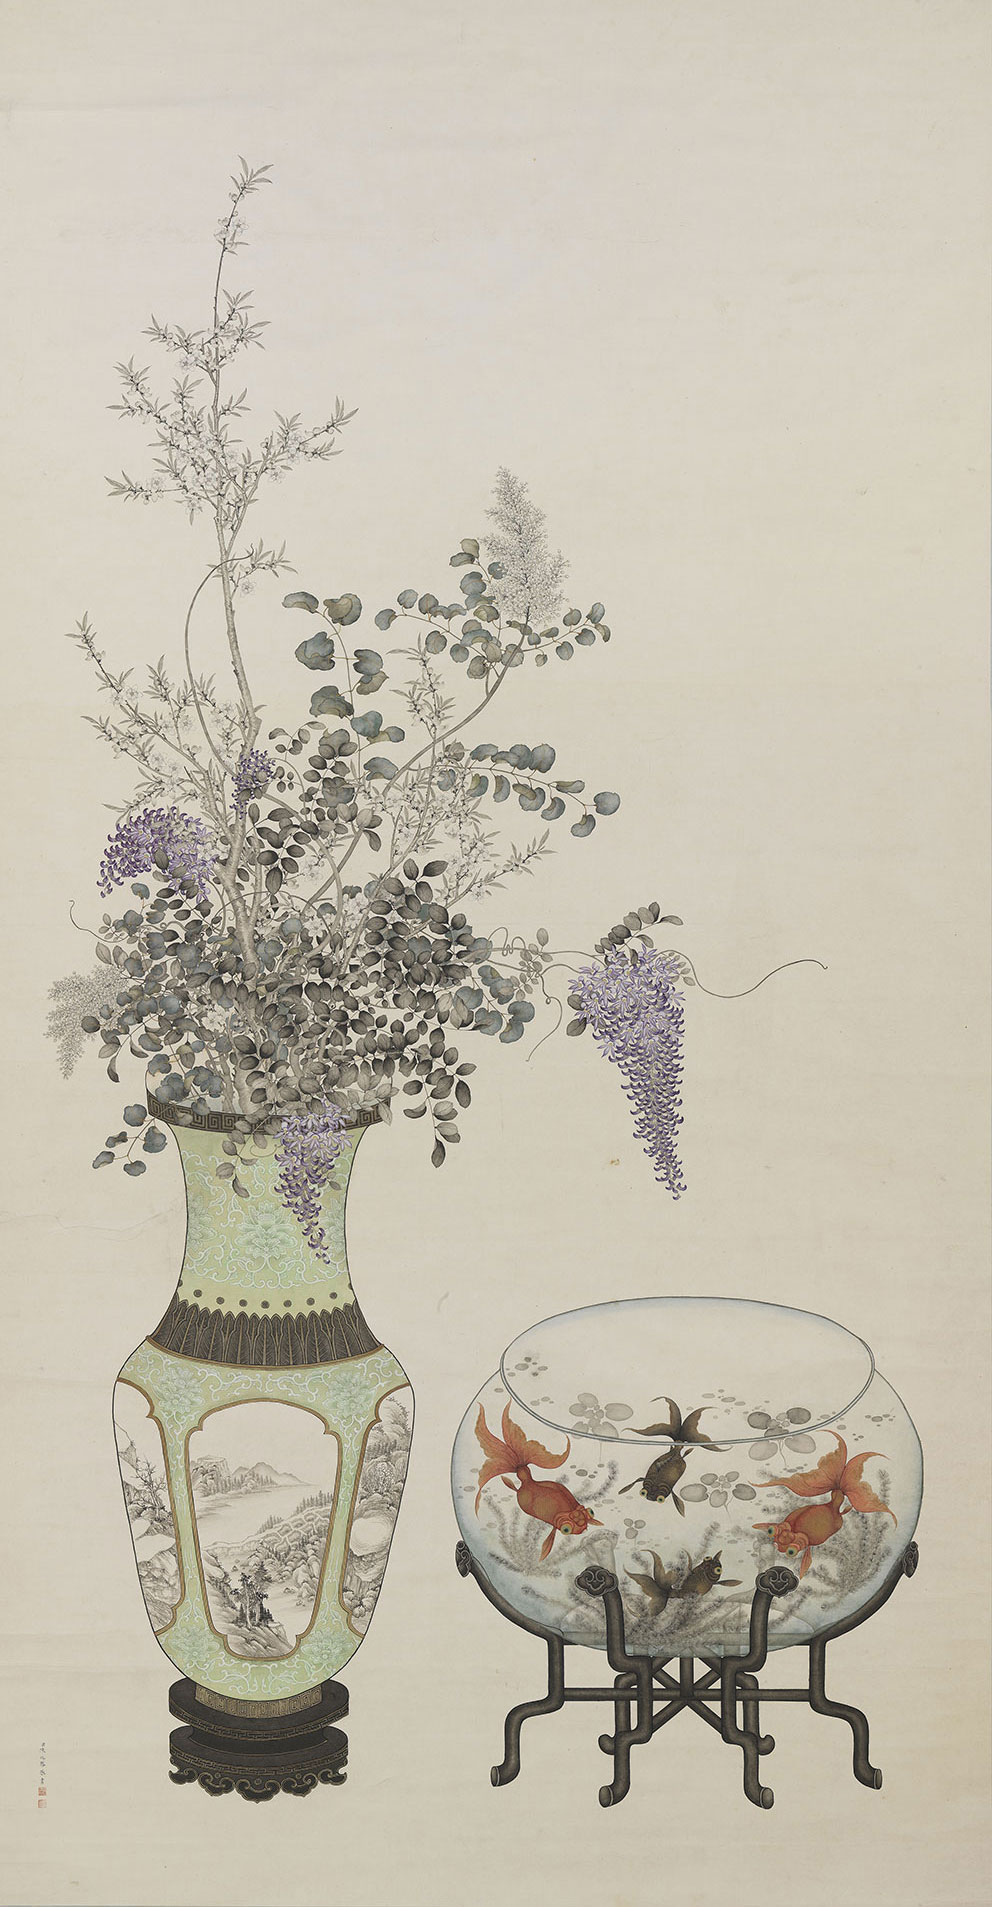 Vase of Flowers and a Goldfish Bowl